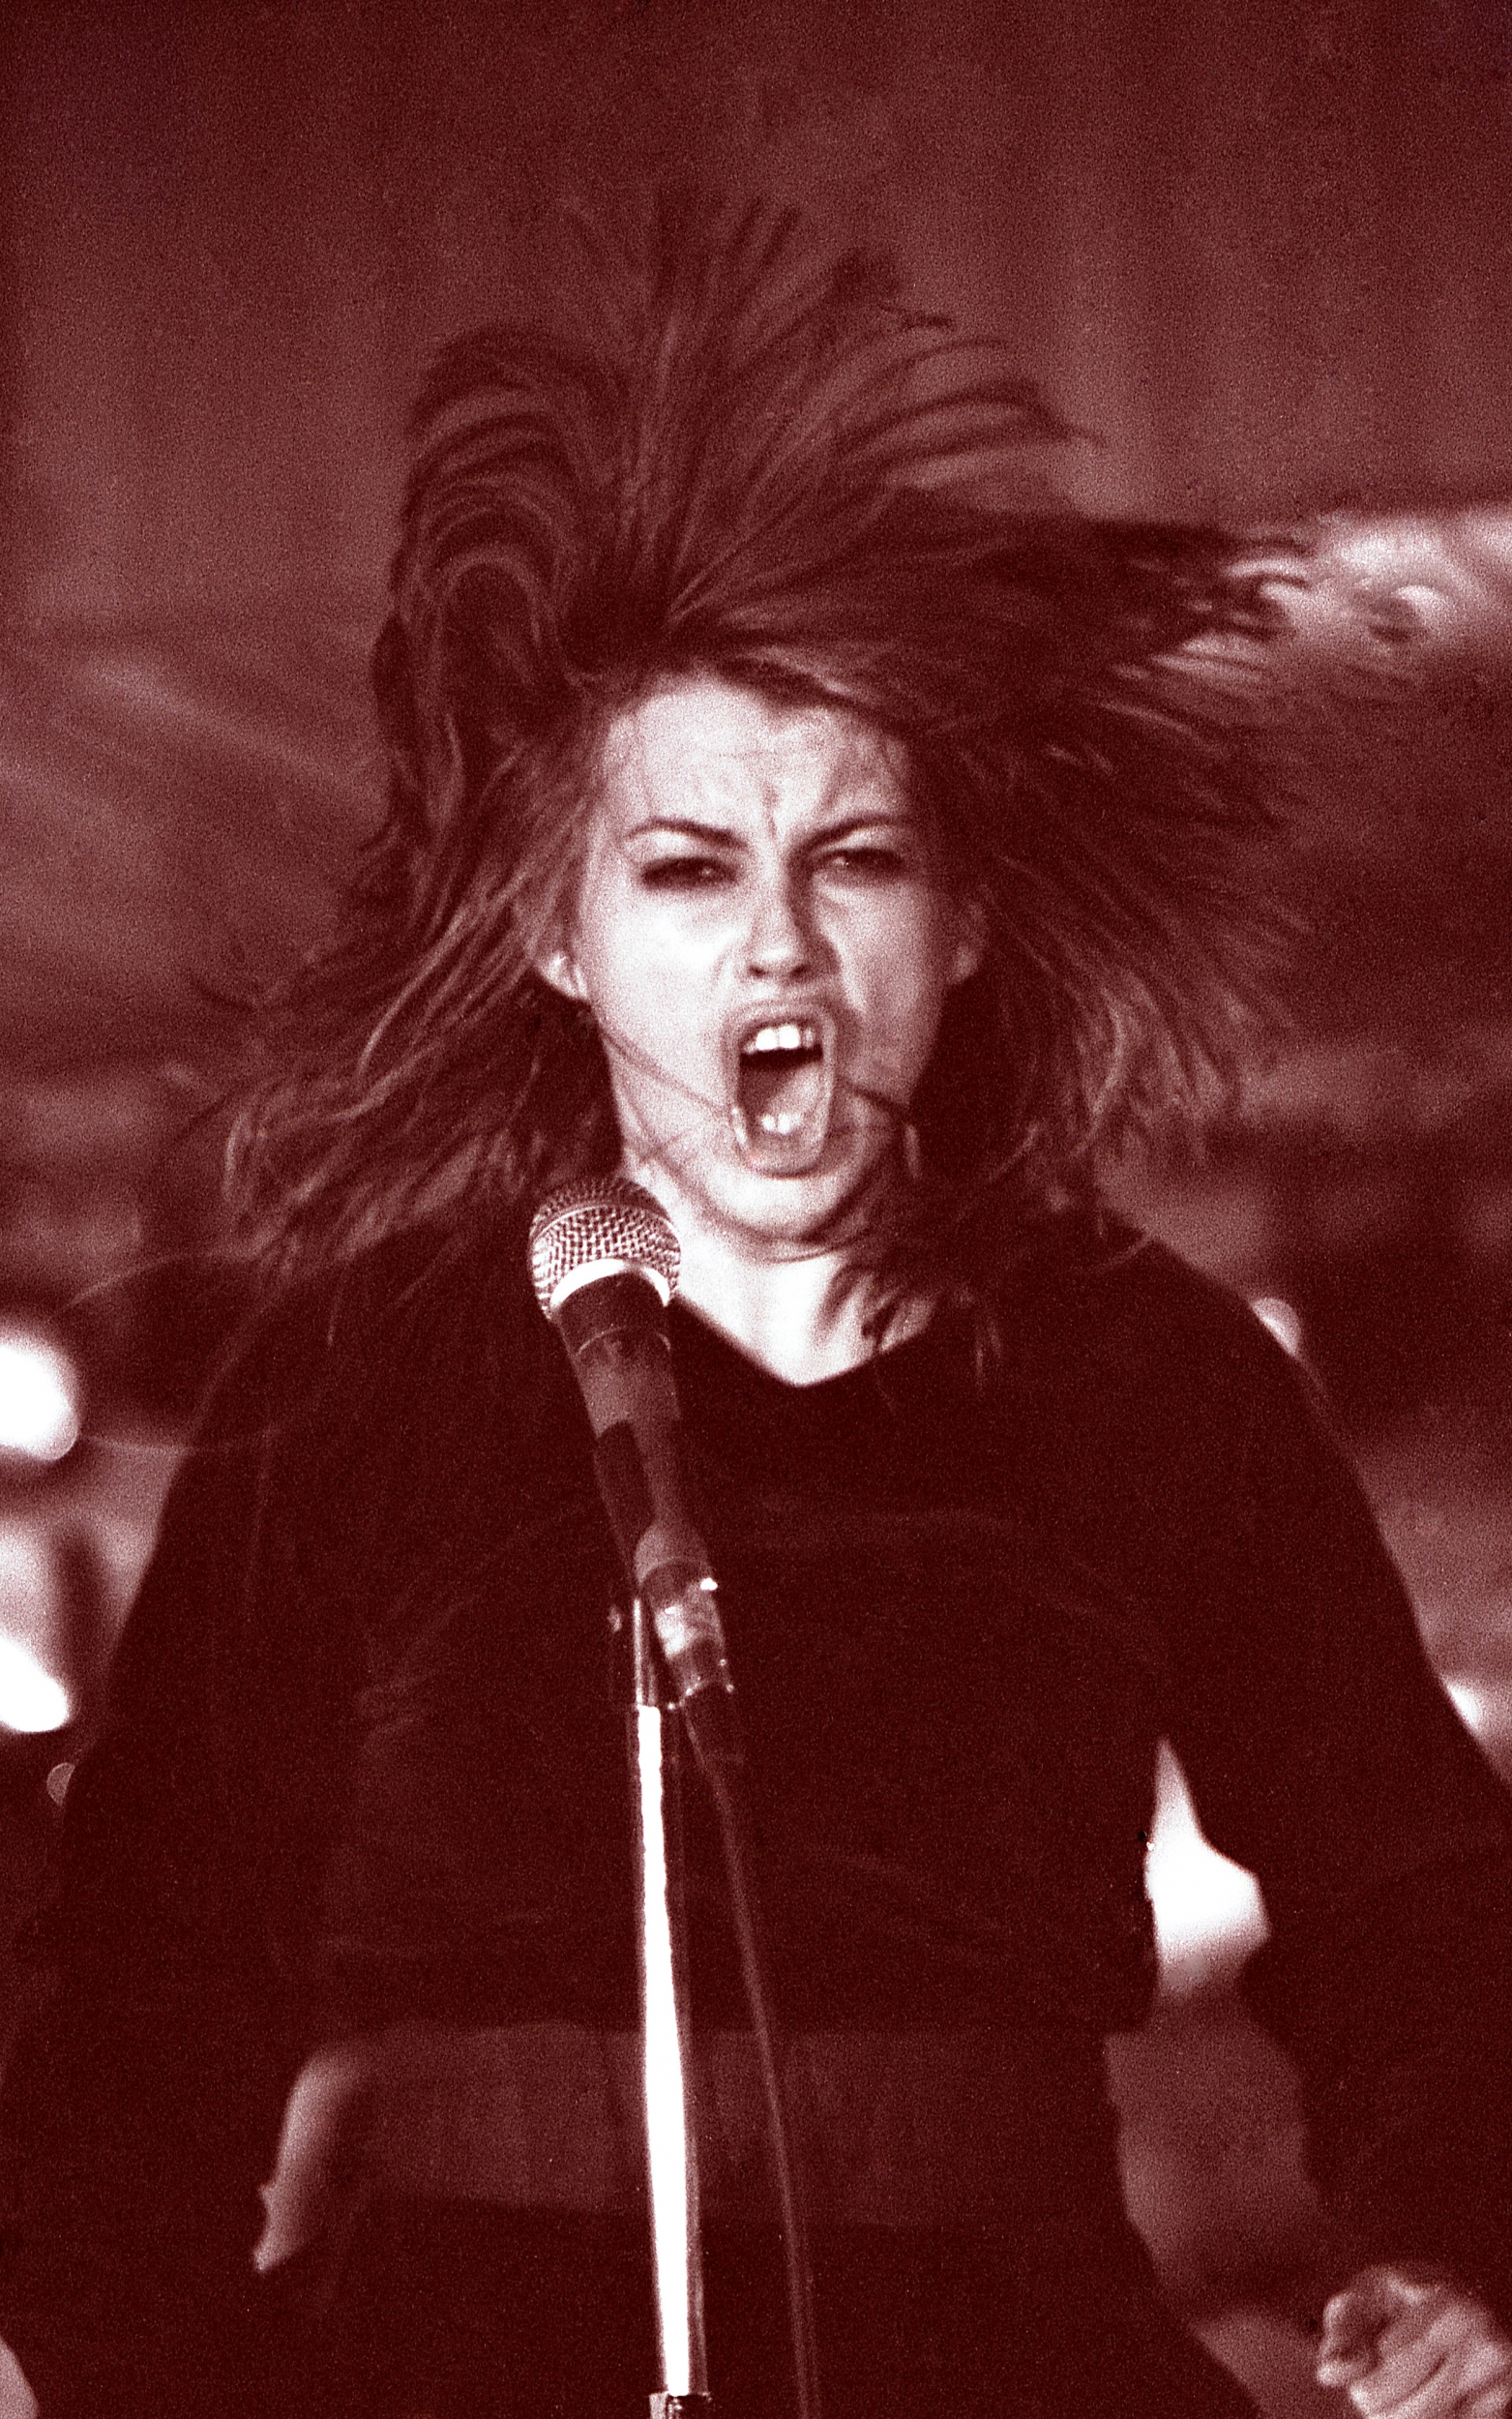 Chrissy Amphlett's hair sounds her head like a mane as she performs live.